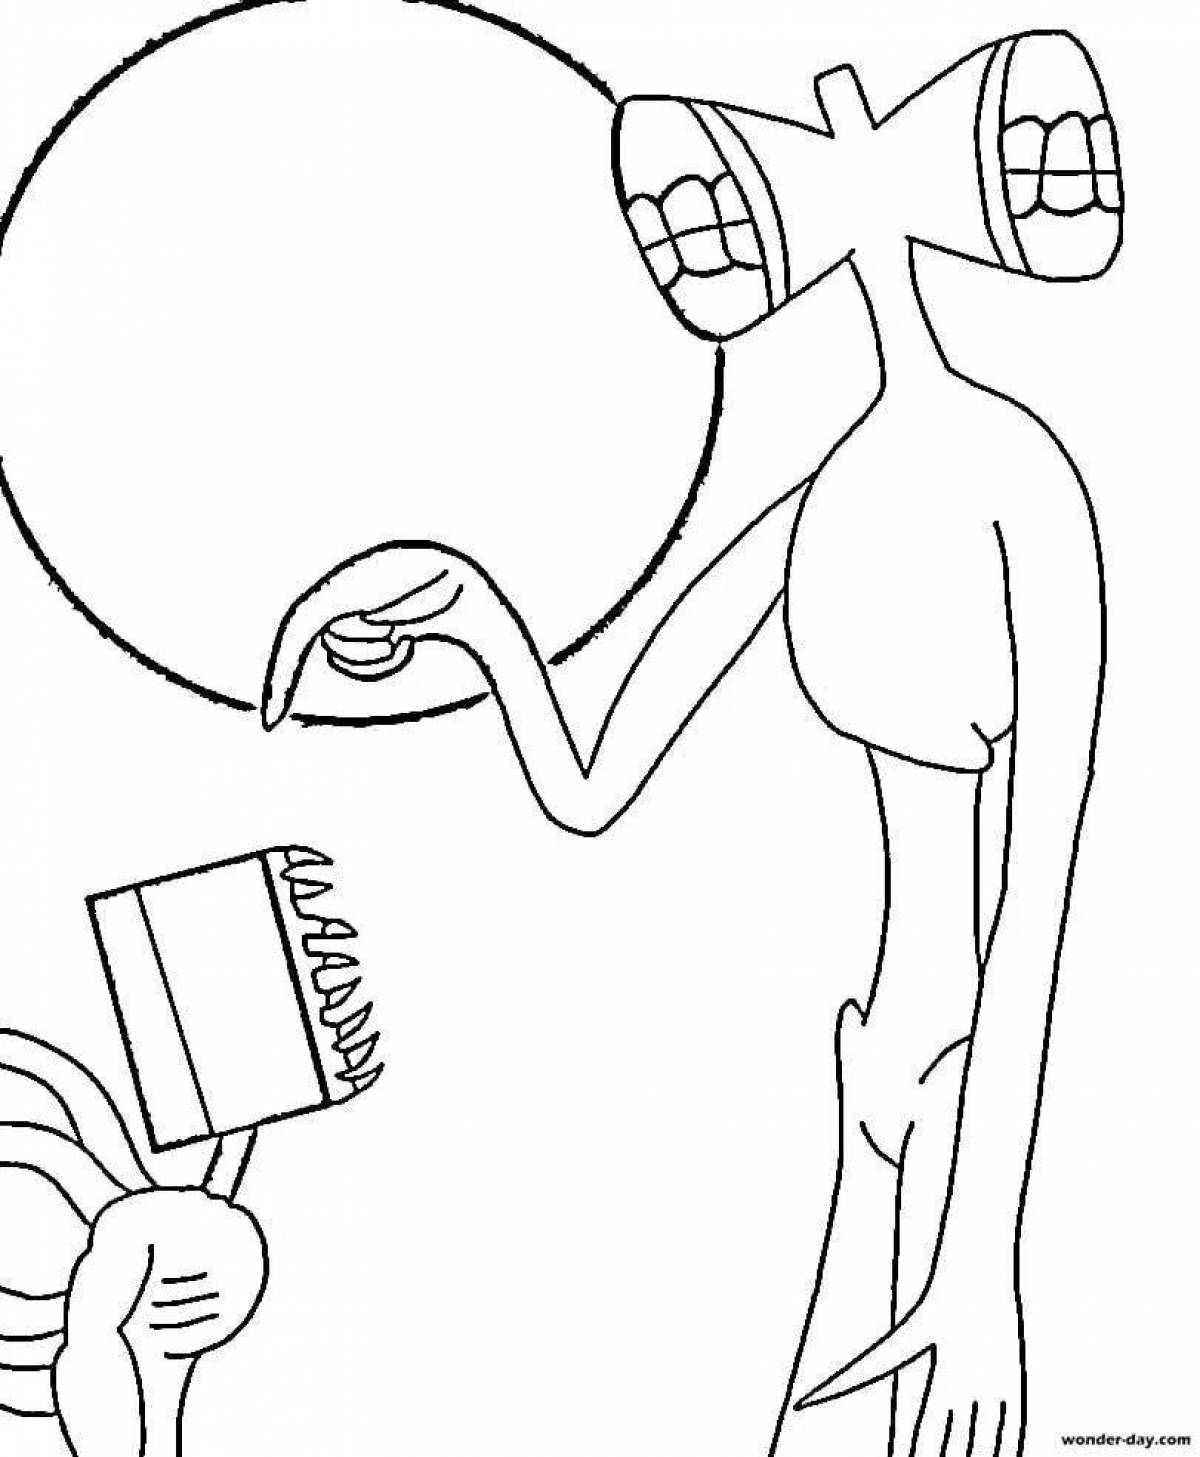 Magic householder coloring page